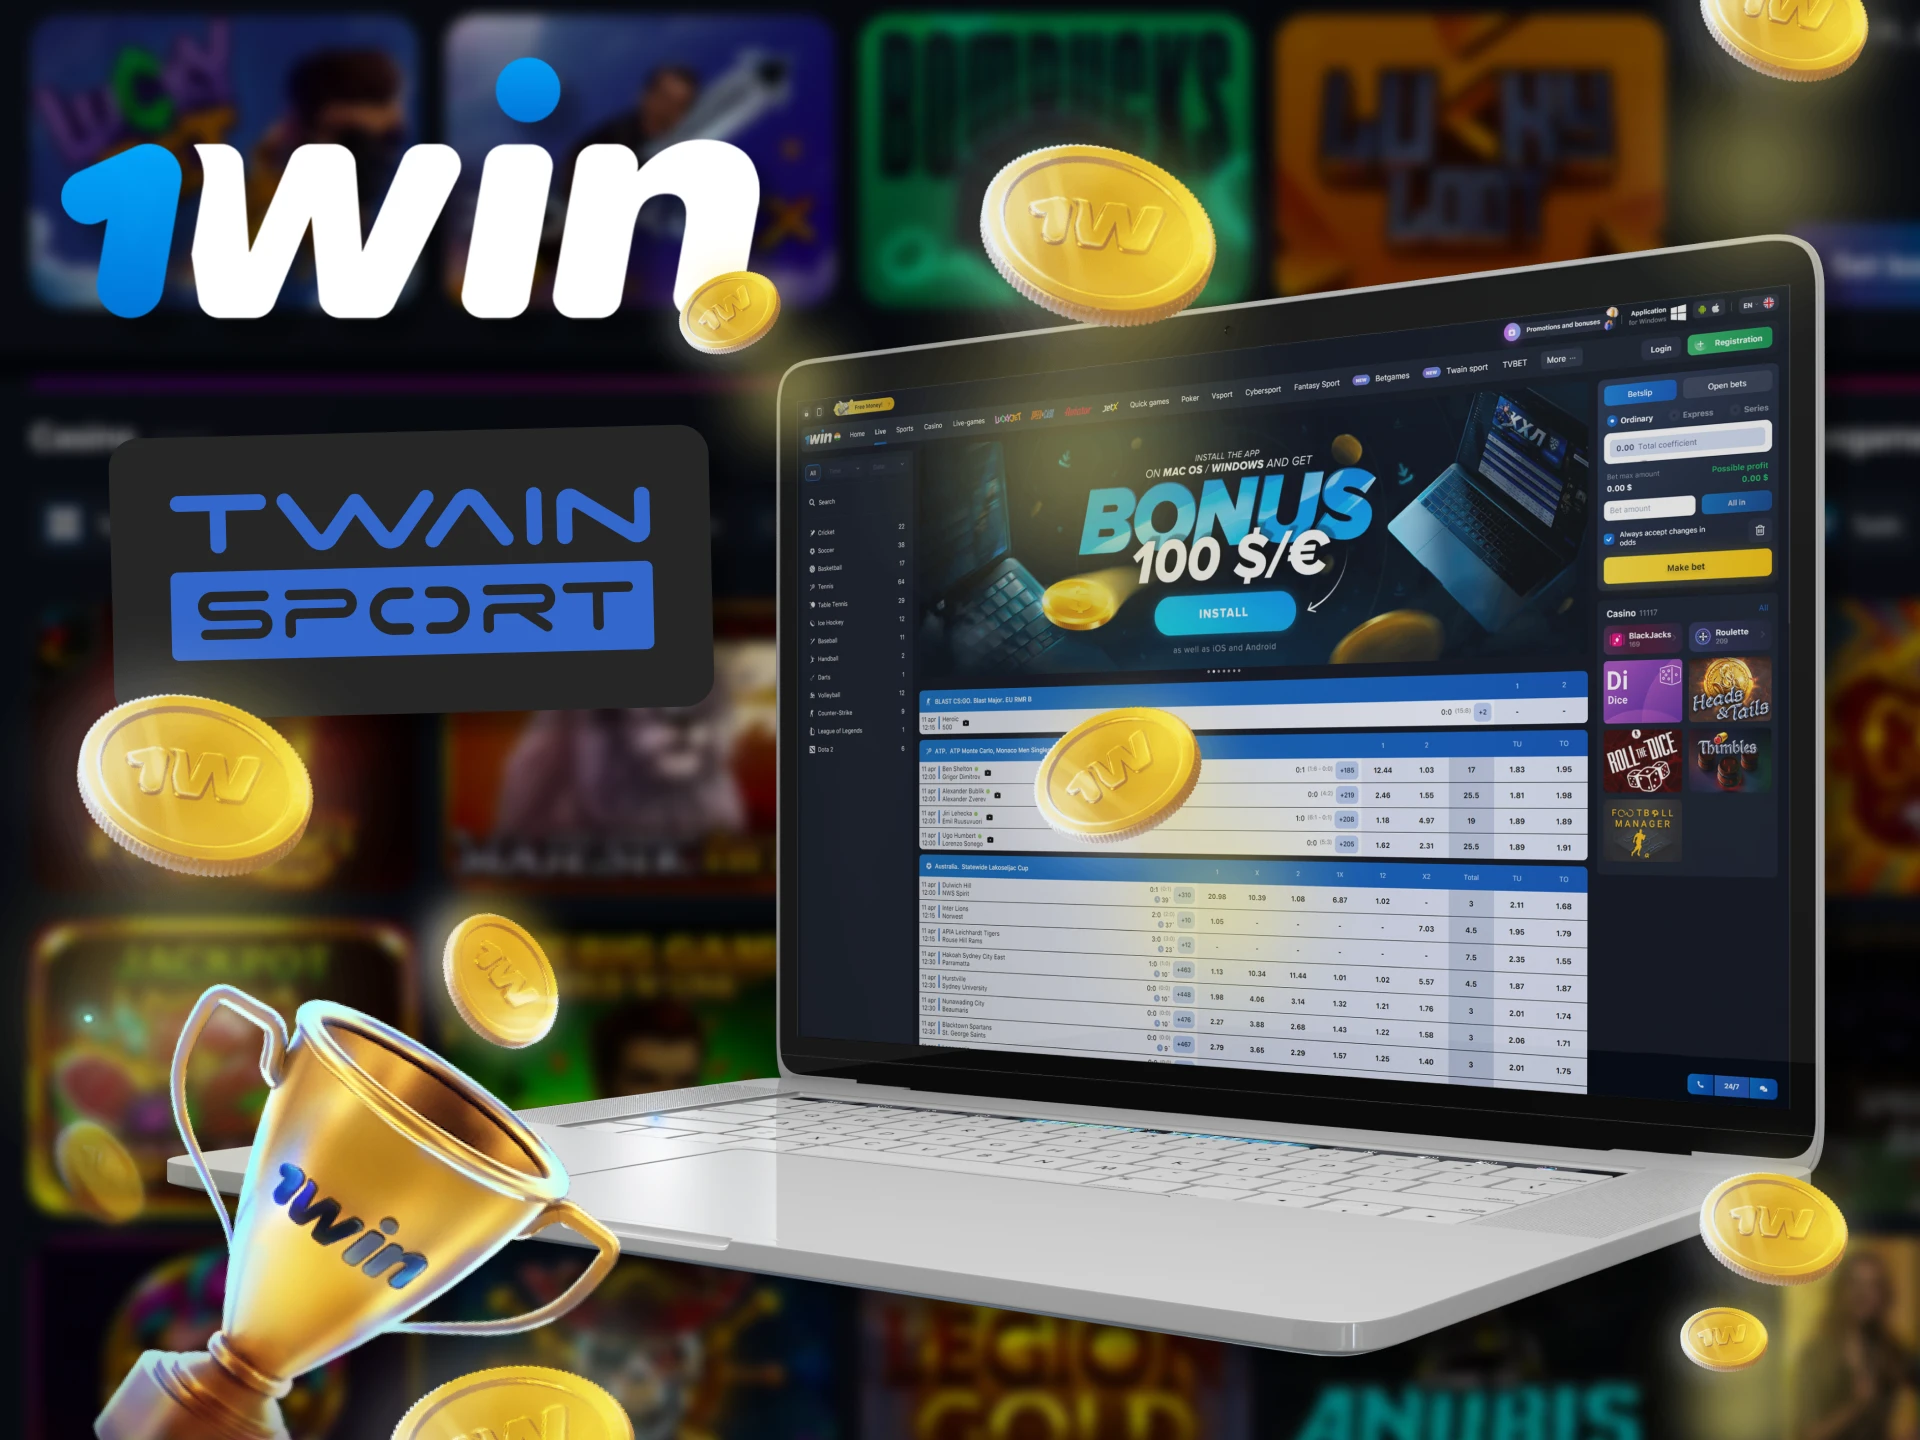 Try Twain Sports from BetGames at 1Win.